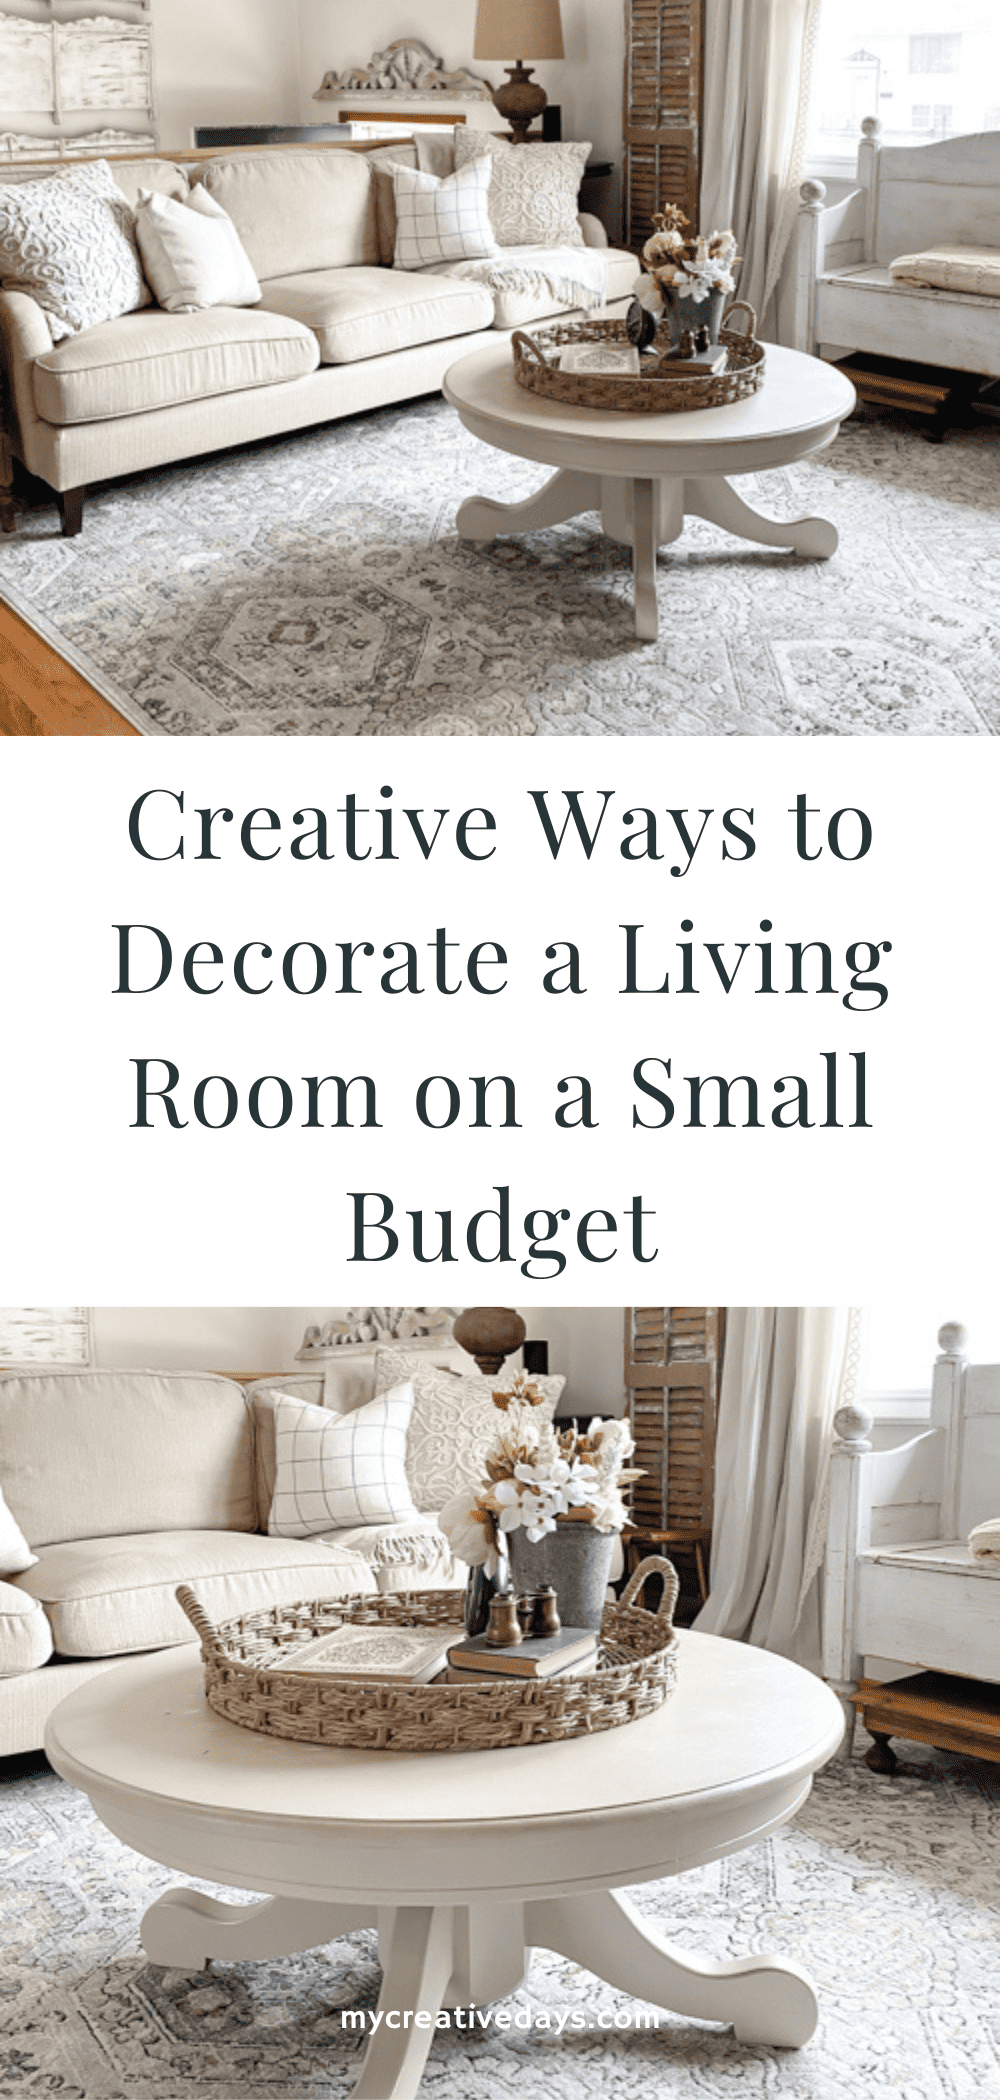 If you have a small budget but crave beautiful spaces in your home, these creative Ways to Decorate a Living Room on a Small Budget will help!